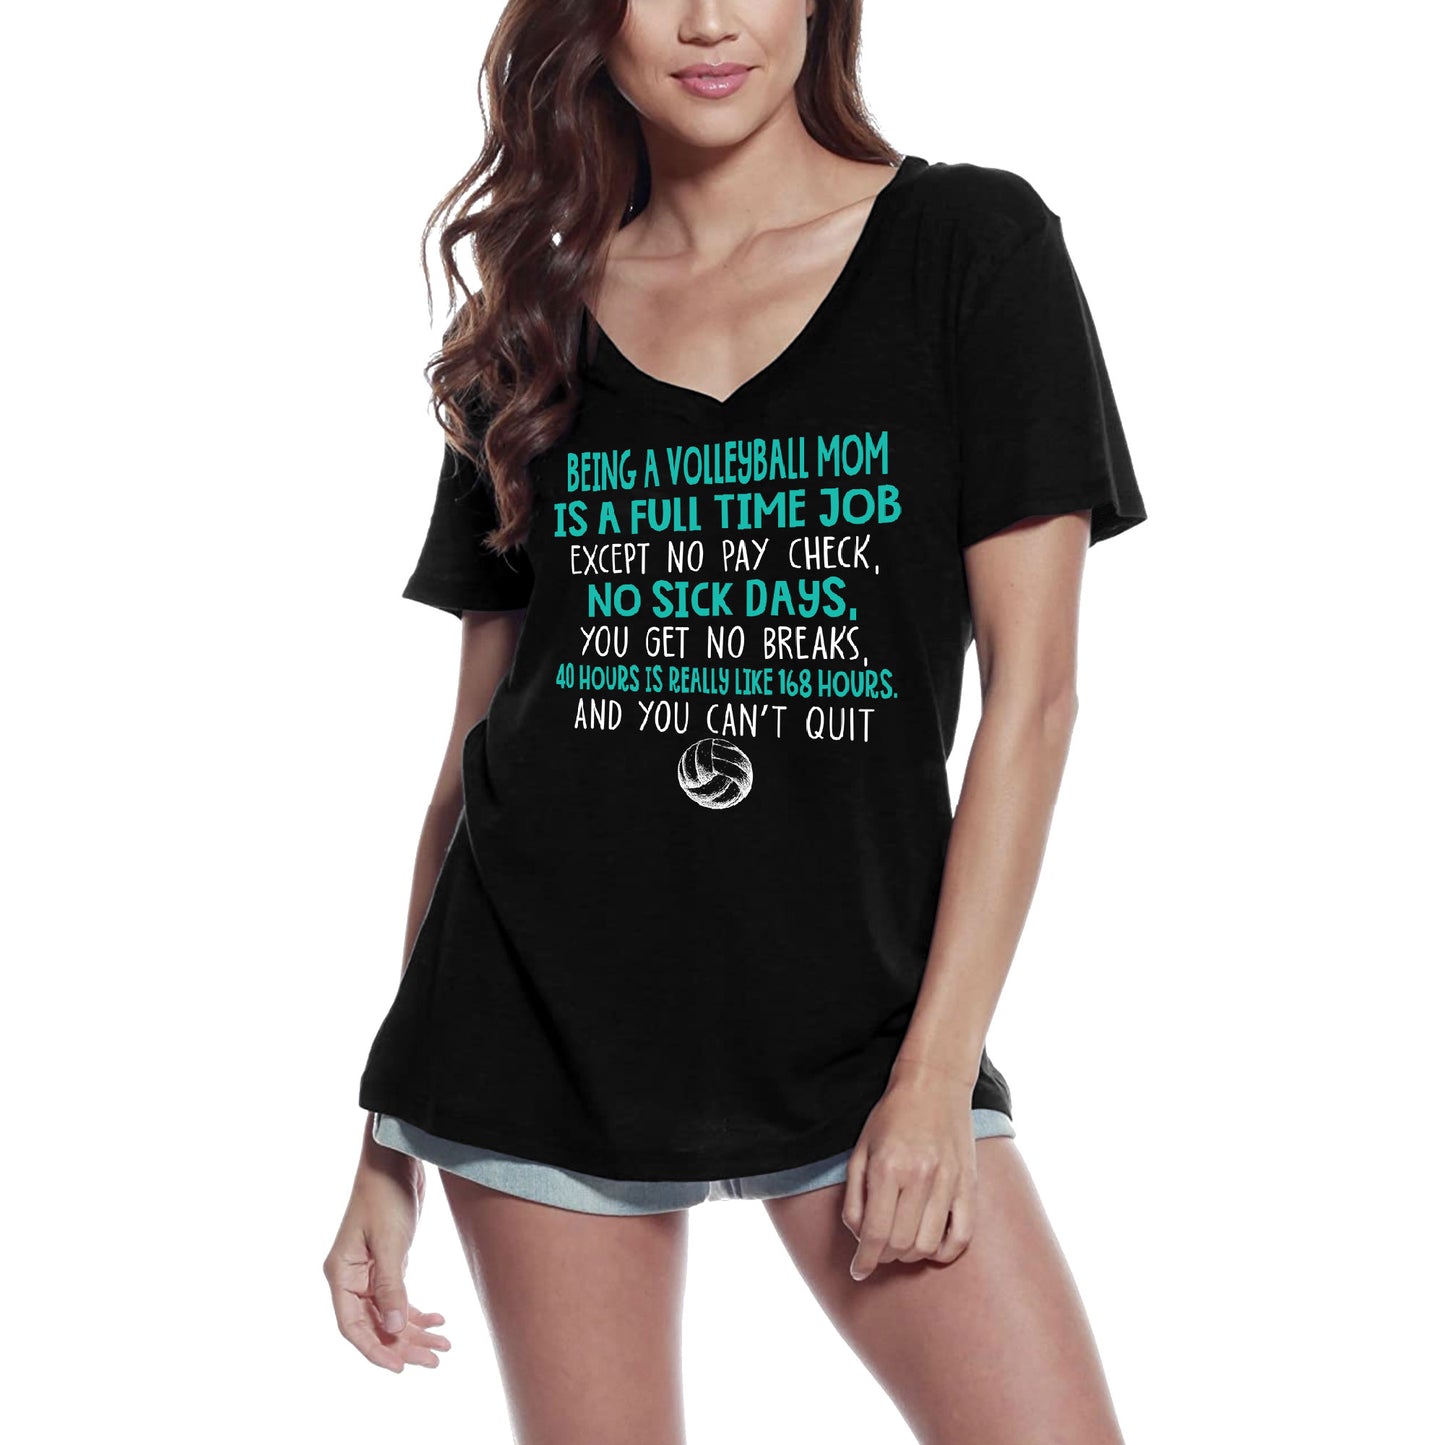 ULTRABASIC Women's V-Neck T-Shirt Being A Volleyball Mom - Funny Quote